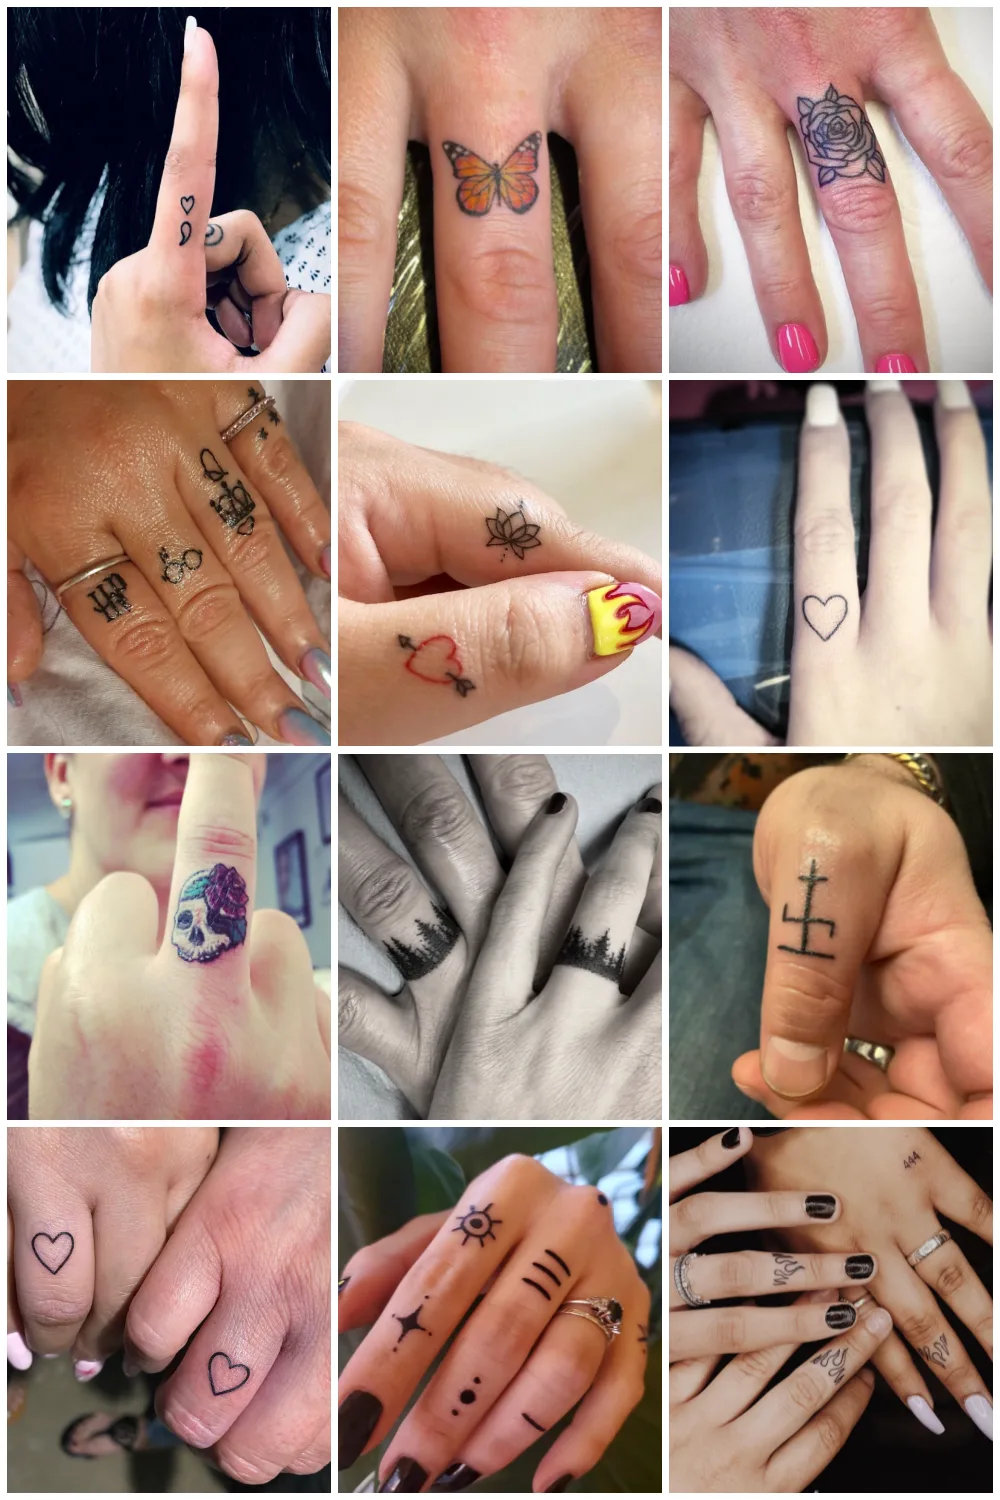 Top 77 Best Small Finger Tattoo Ideas - [2021 Inspiration Guide] | Hand tattoos  for guys, Small finger tattoos, Tattoos for guys